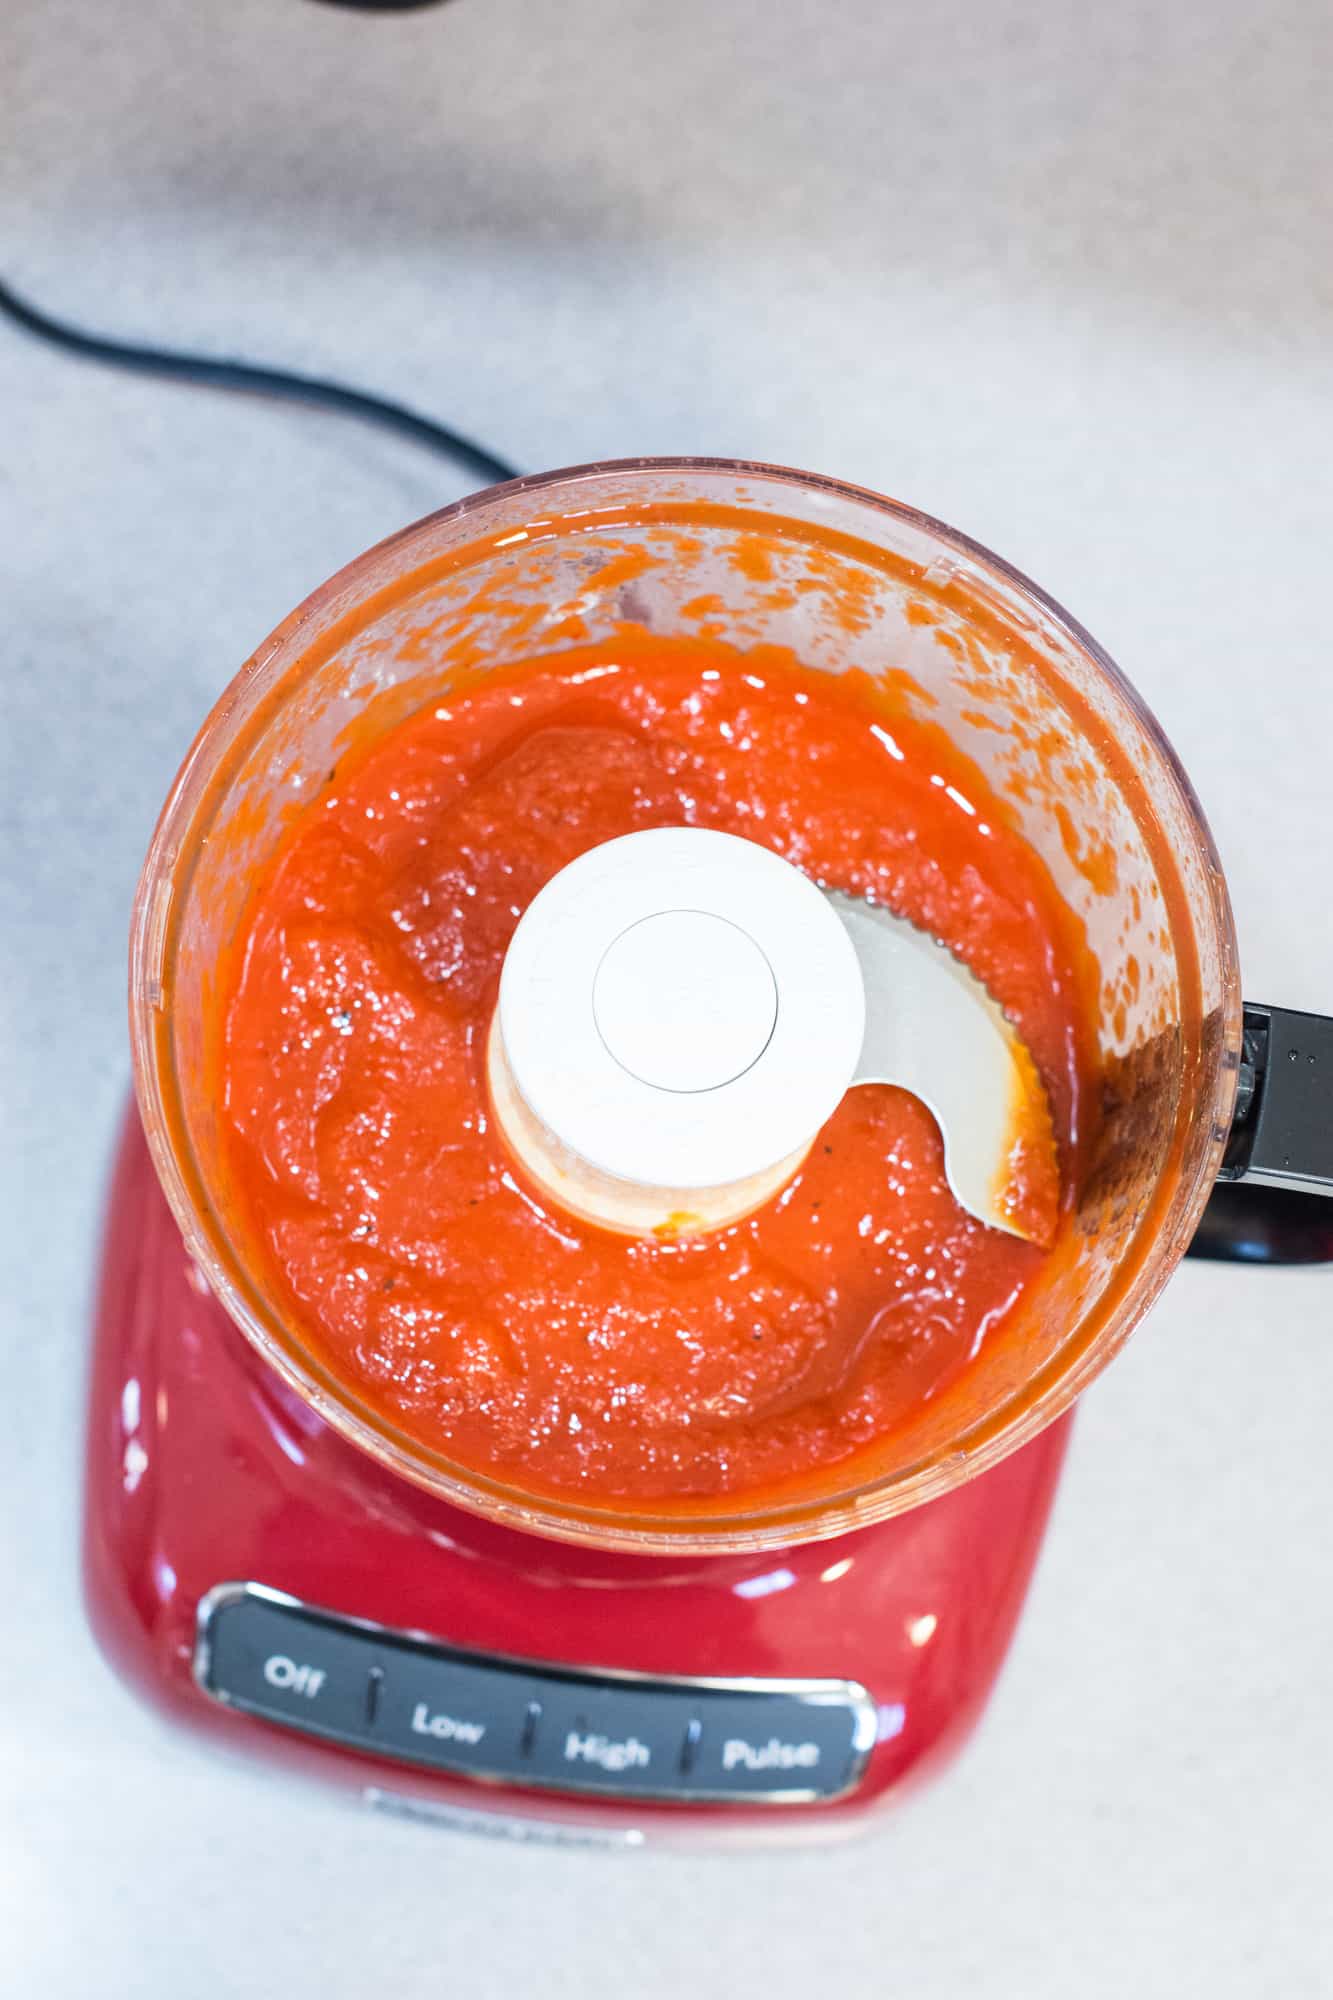 roasted red peppers pureed in food processor